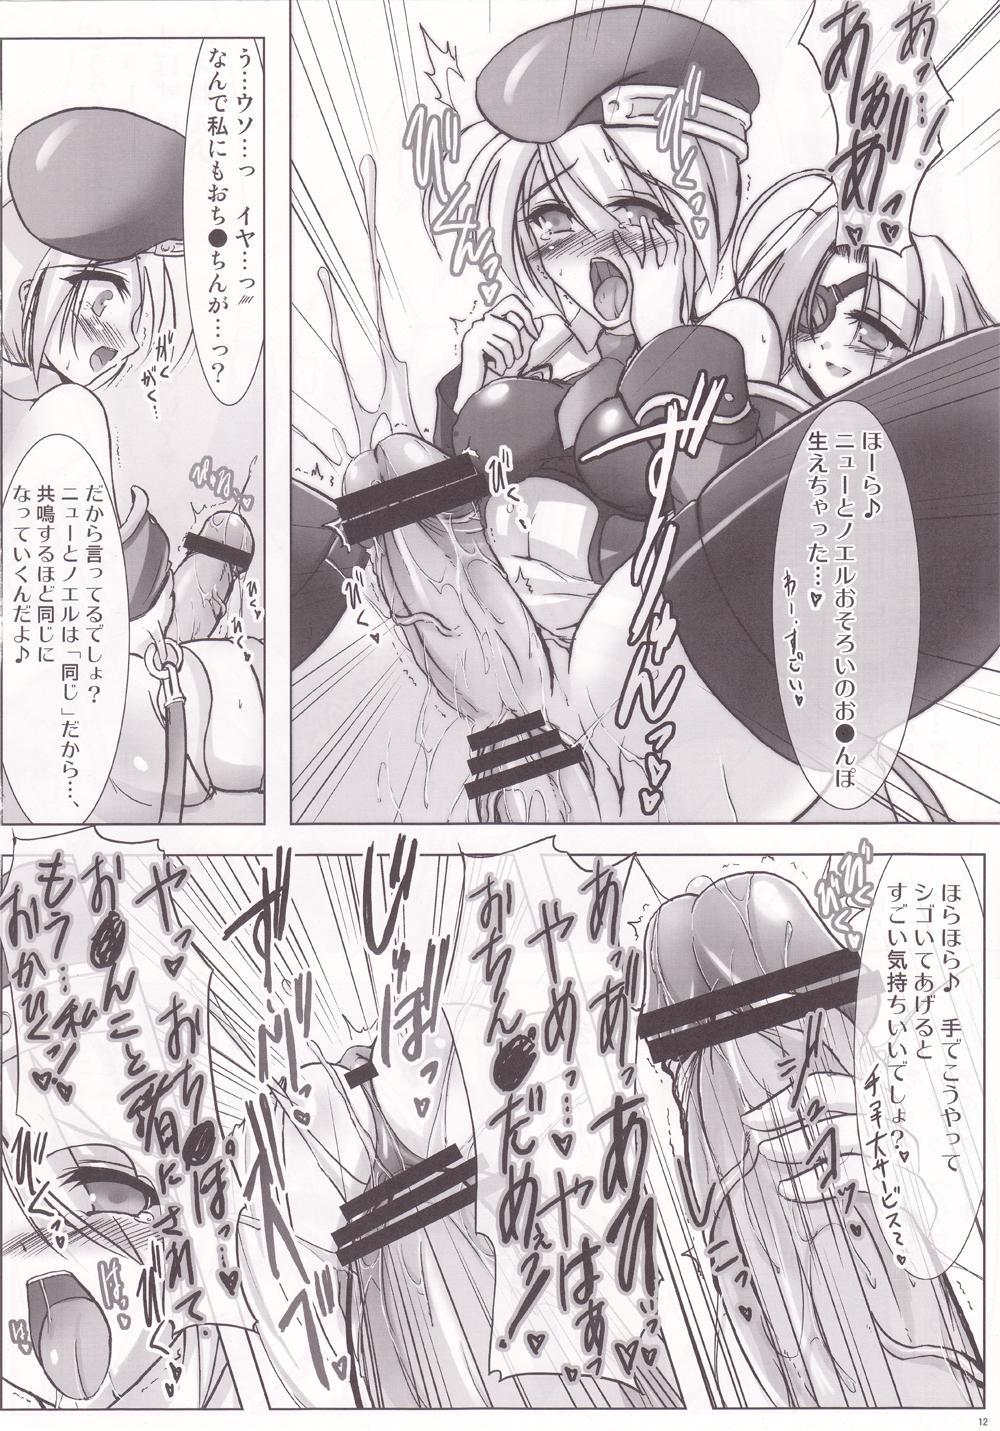 Foreplay Blue Reloaded - Blazblue Argentino - Page 11